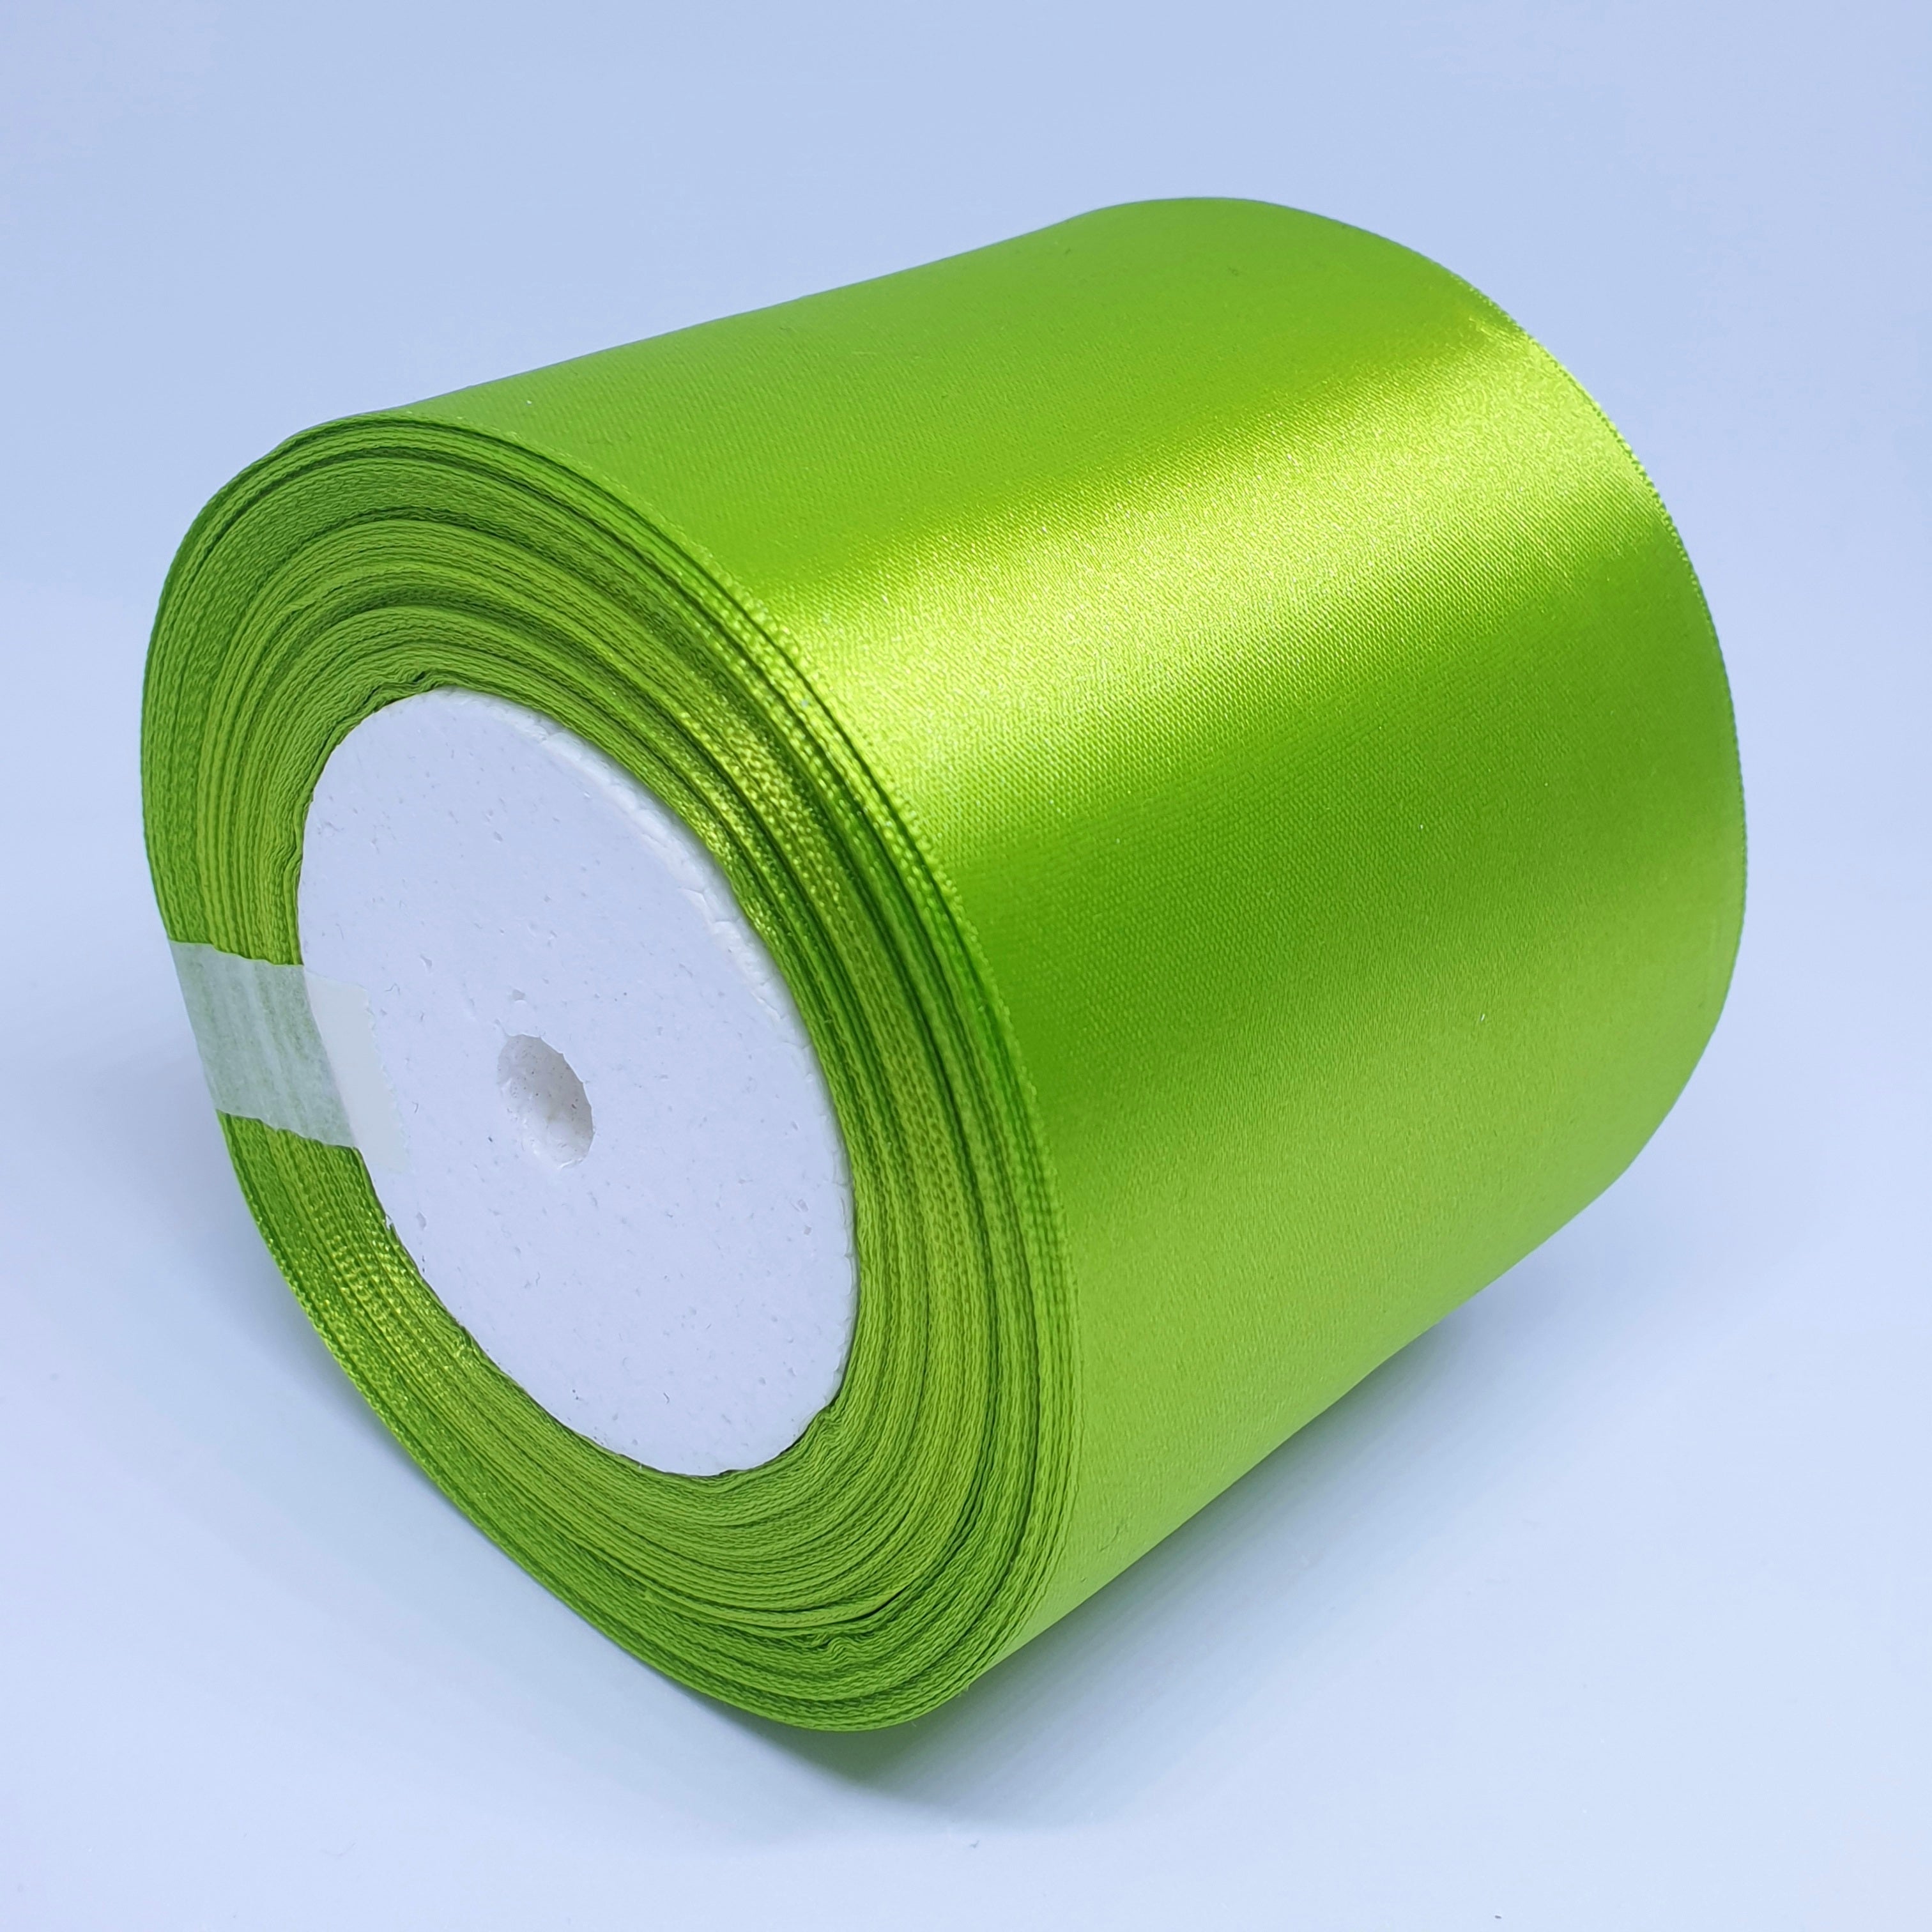 MajorCrafts 75mm 22metres Lime Green Single Sided Satin Fabric Ribbon Roll R95